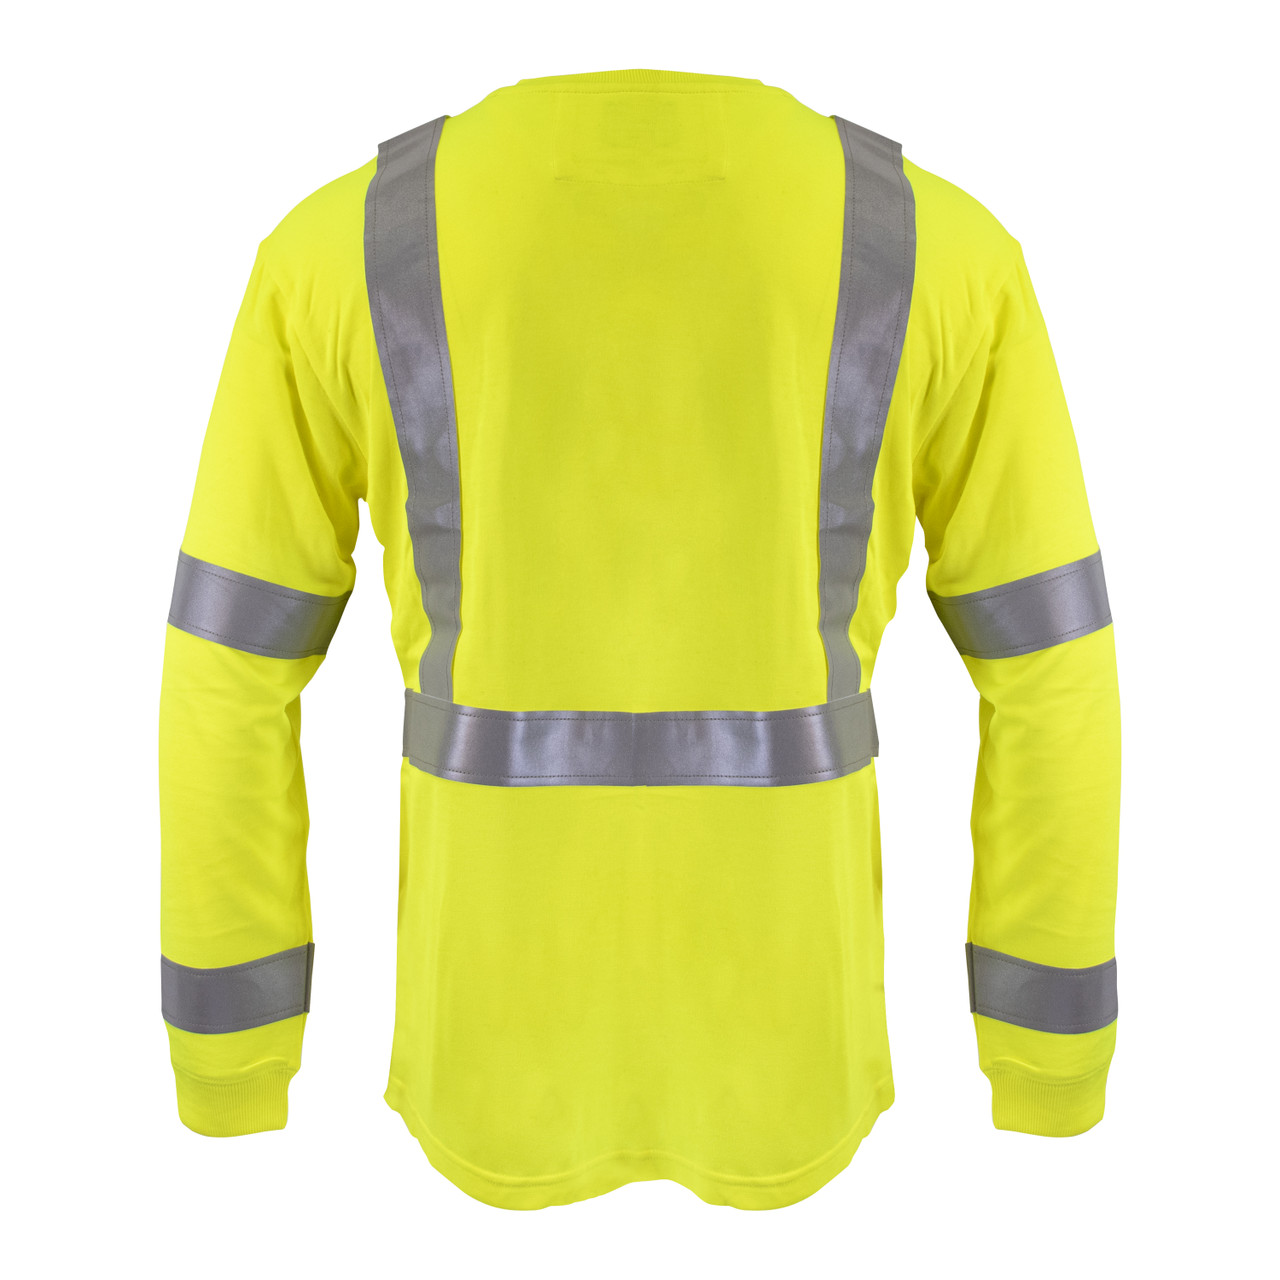 https://cdn11.bigcommerce.com/s-r4f6haoaux/images/stencil/1280x1280/products/799/2195/859-39-flame-resistant-hi-vis-long-sleeve-shirt-with-tape-hi-vis-yellow-KEY-back__24233.1659622408.jpg?c=1